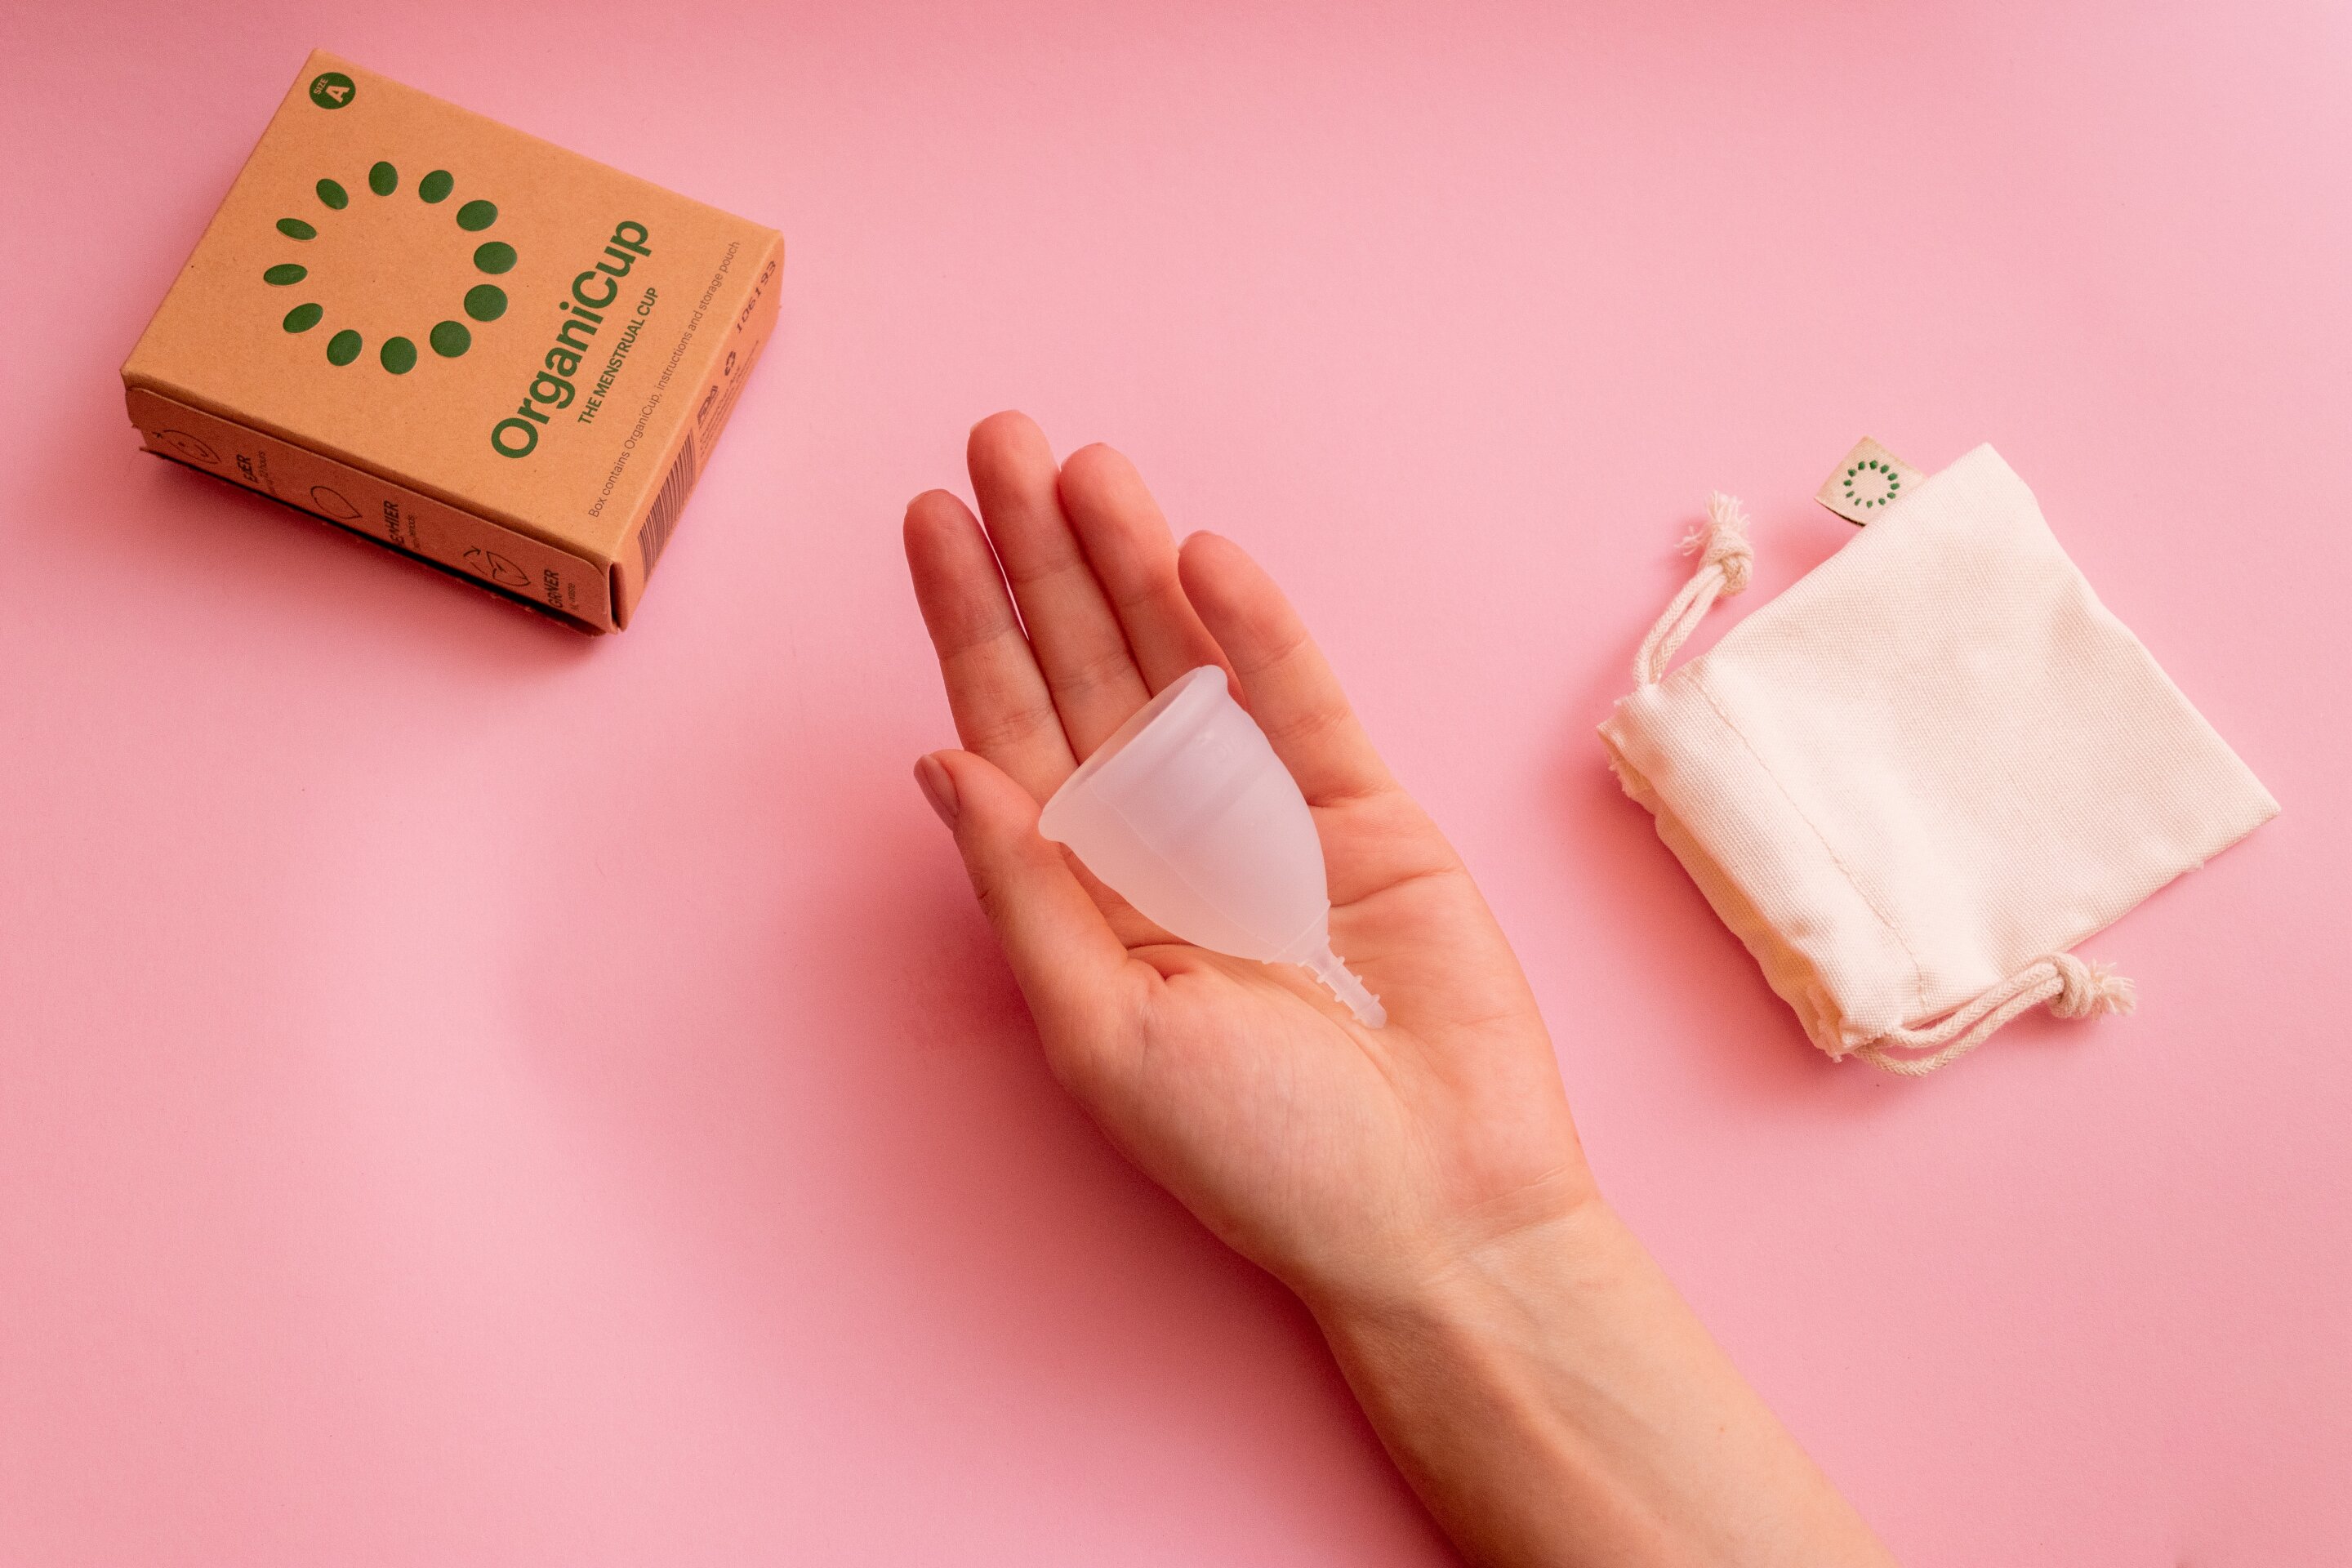 From Tampons to Menstrual Cups: A Guide to Period Products